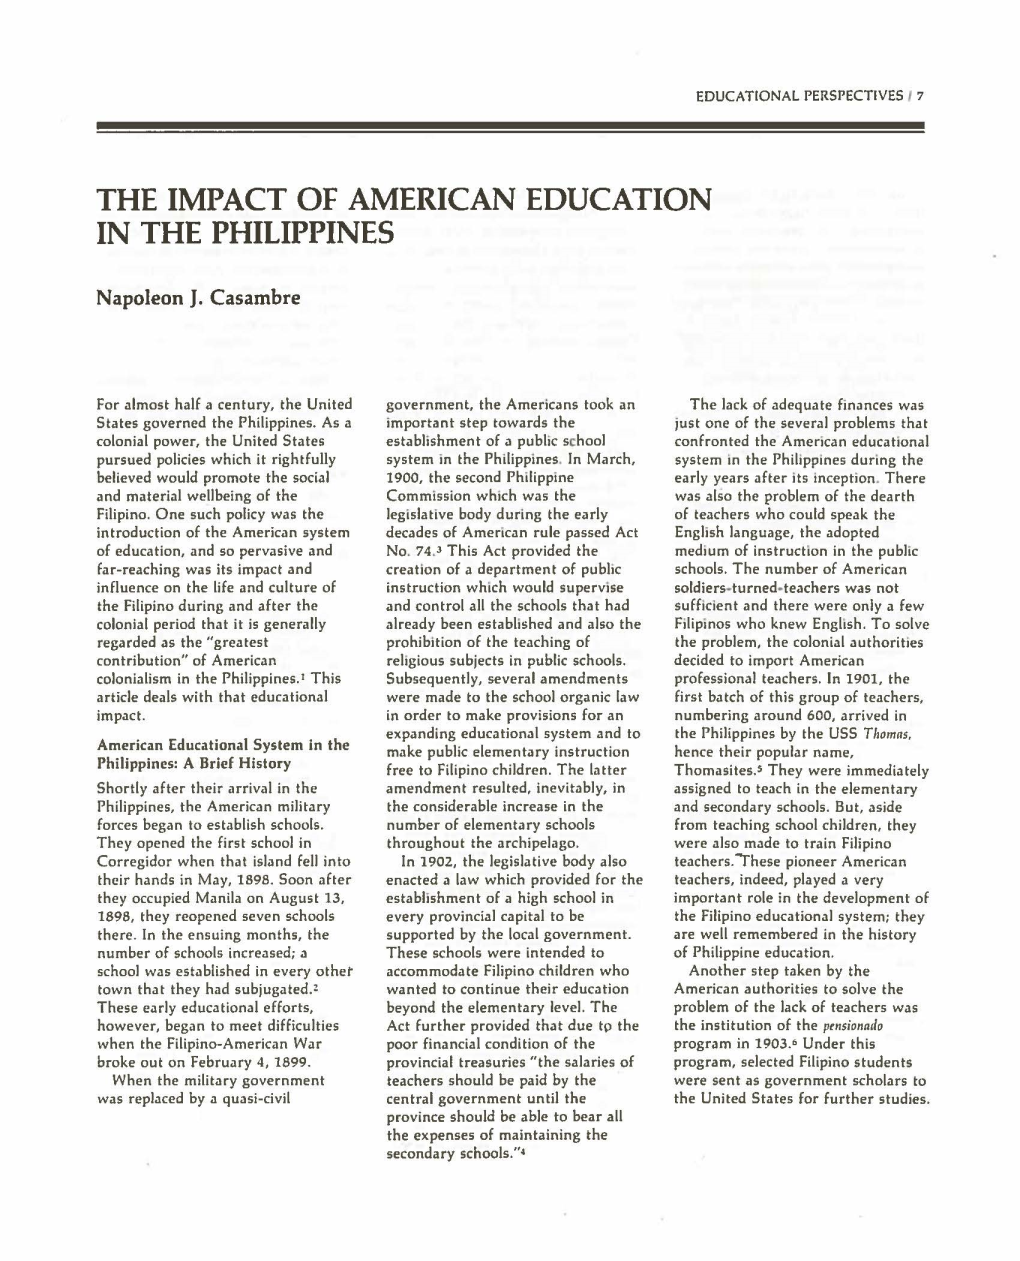 The Impact of American Education in the Philippines